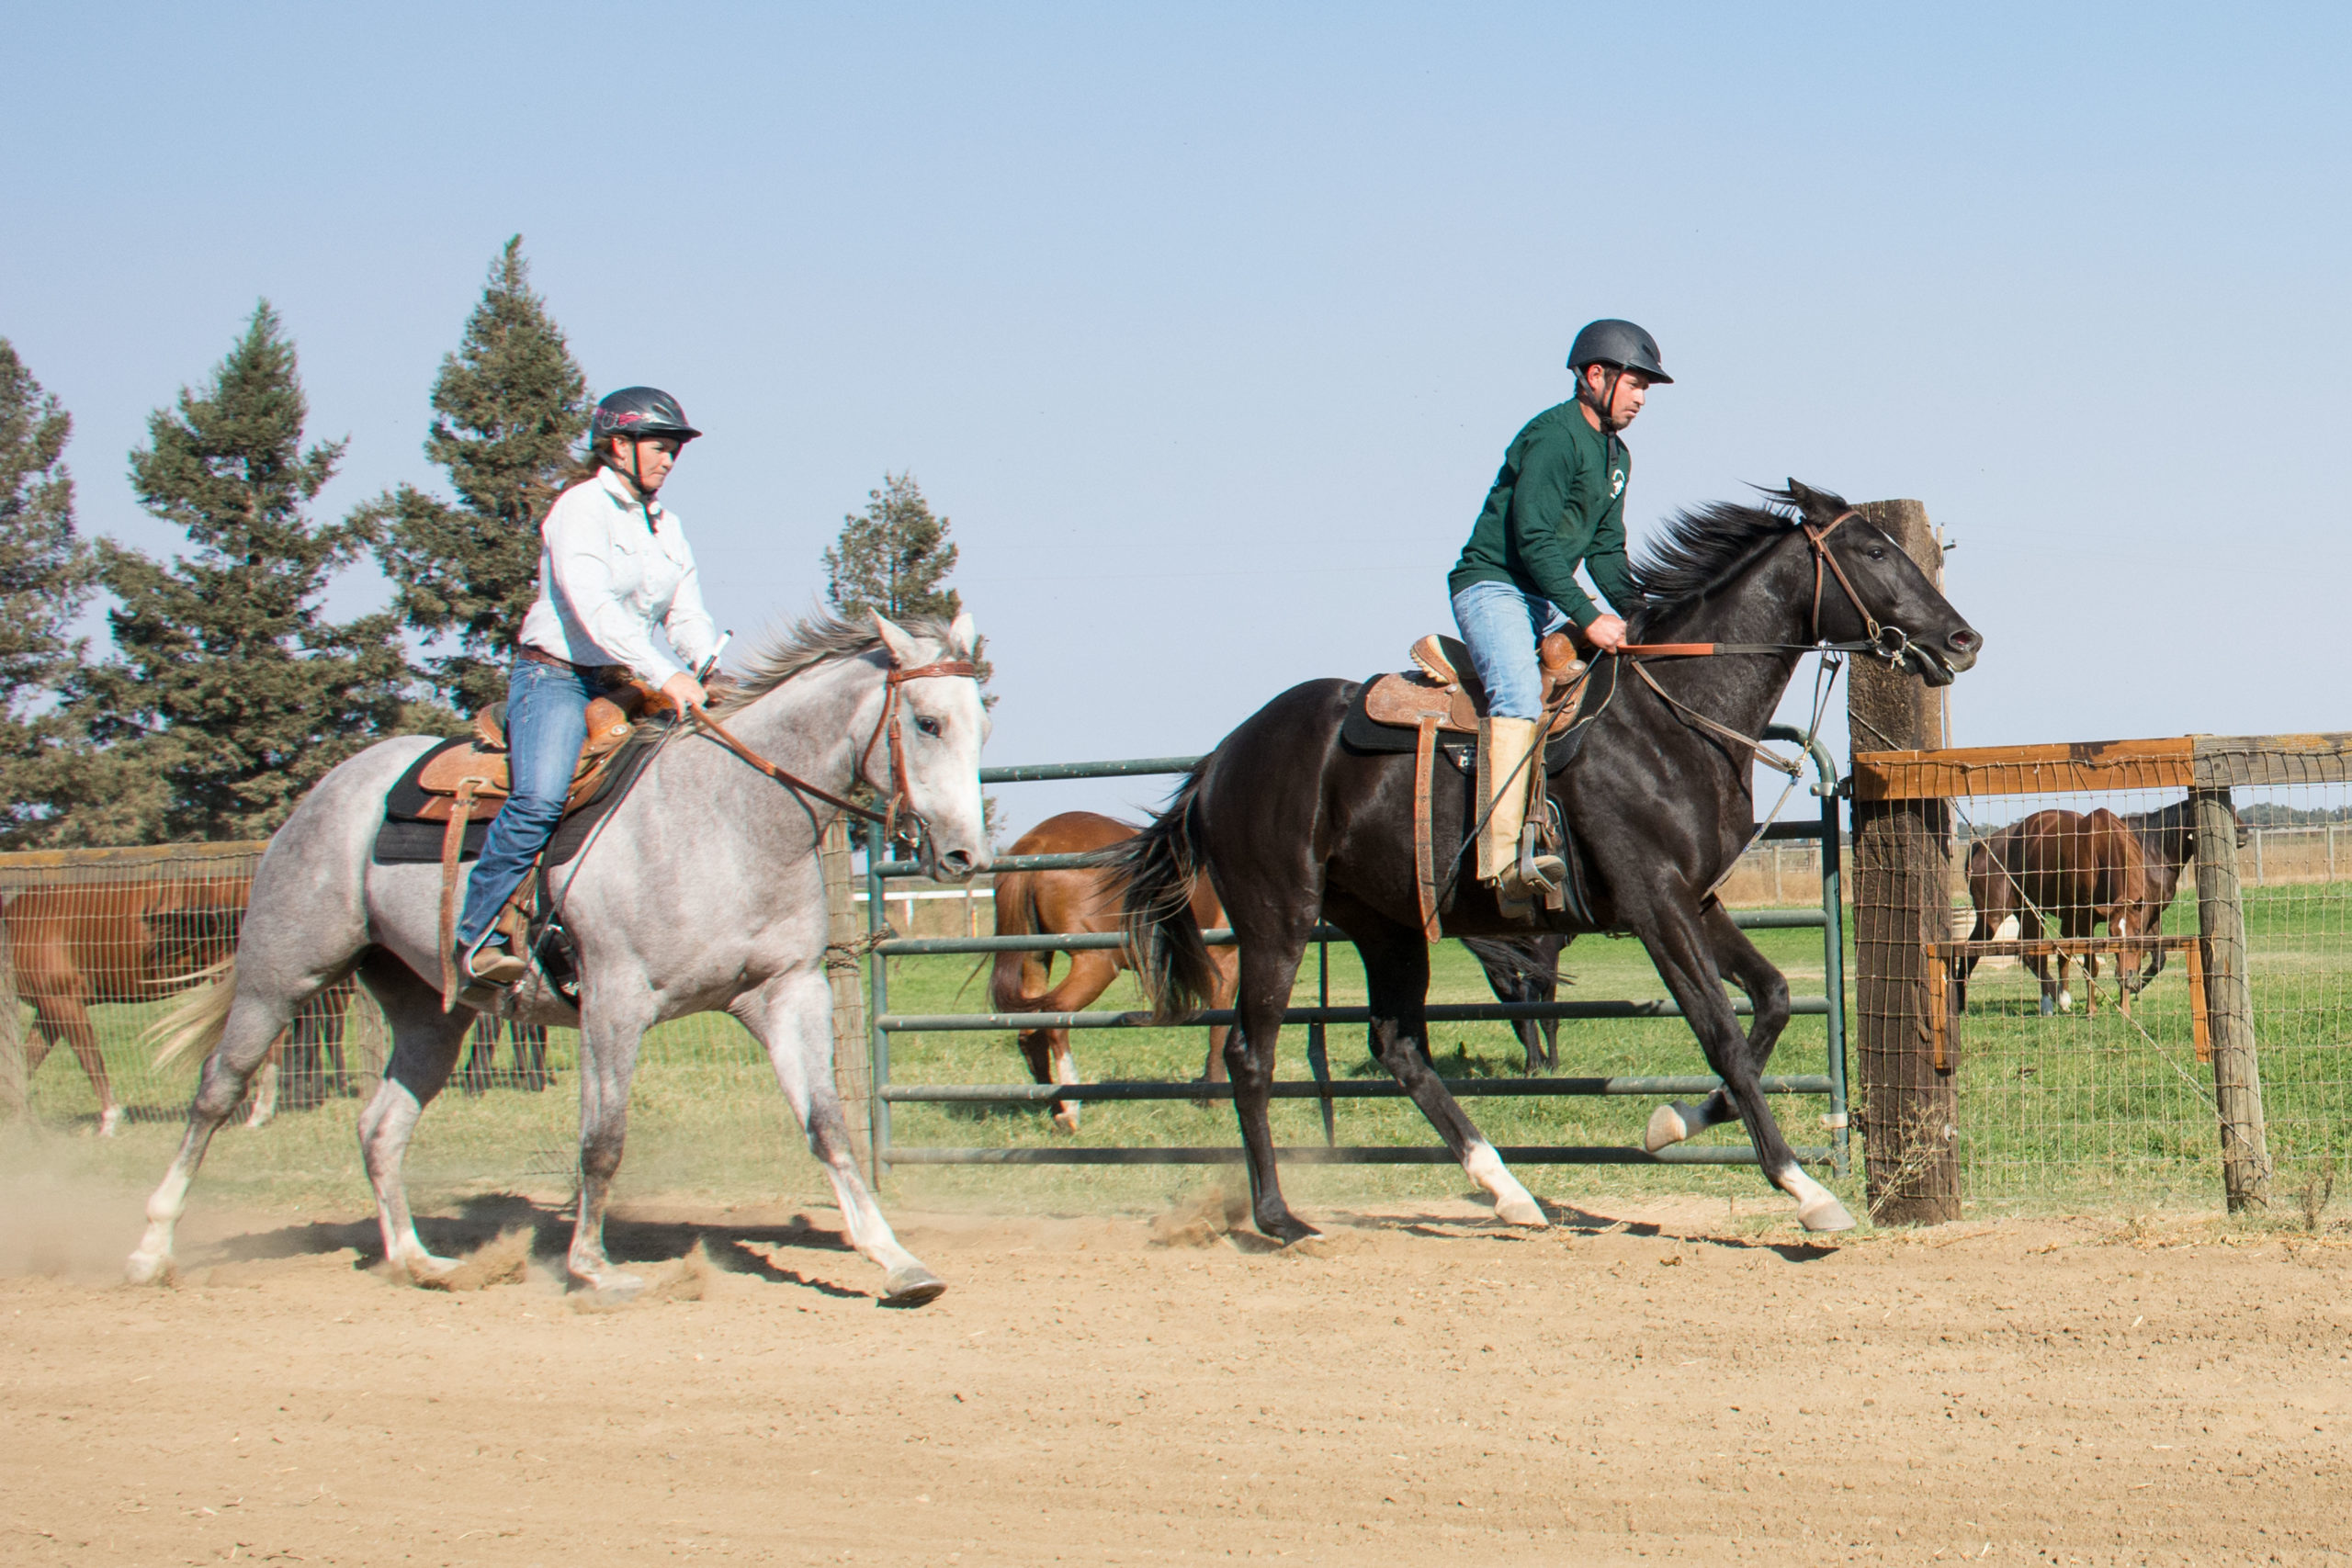 Trainer Mariah Coles and Assistant Trainer Luis Pena at Daehling Ranch Thoroughbreds Elk Grove, California